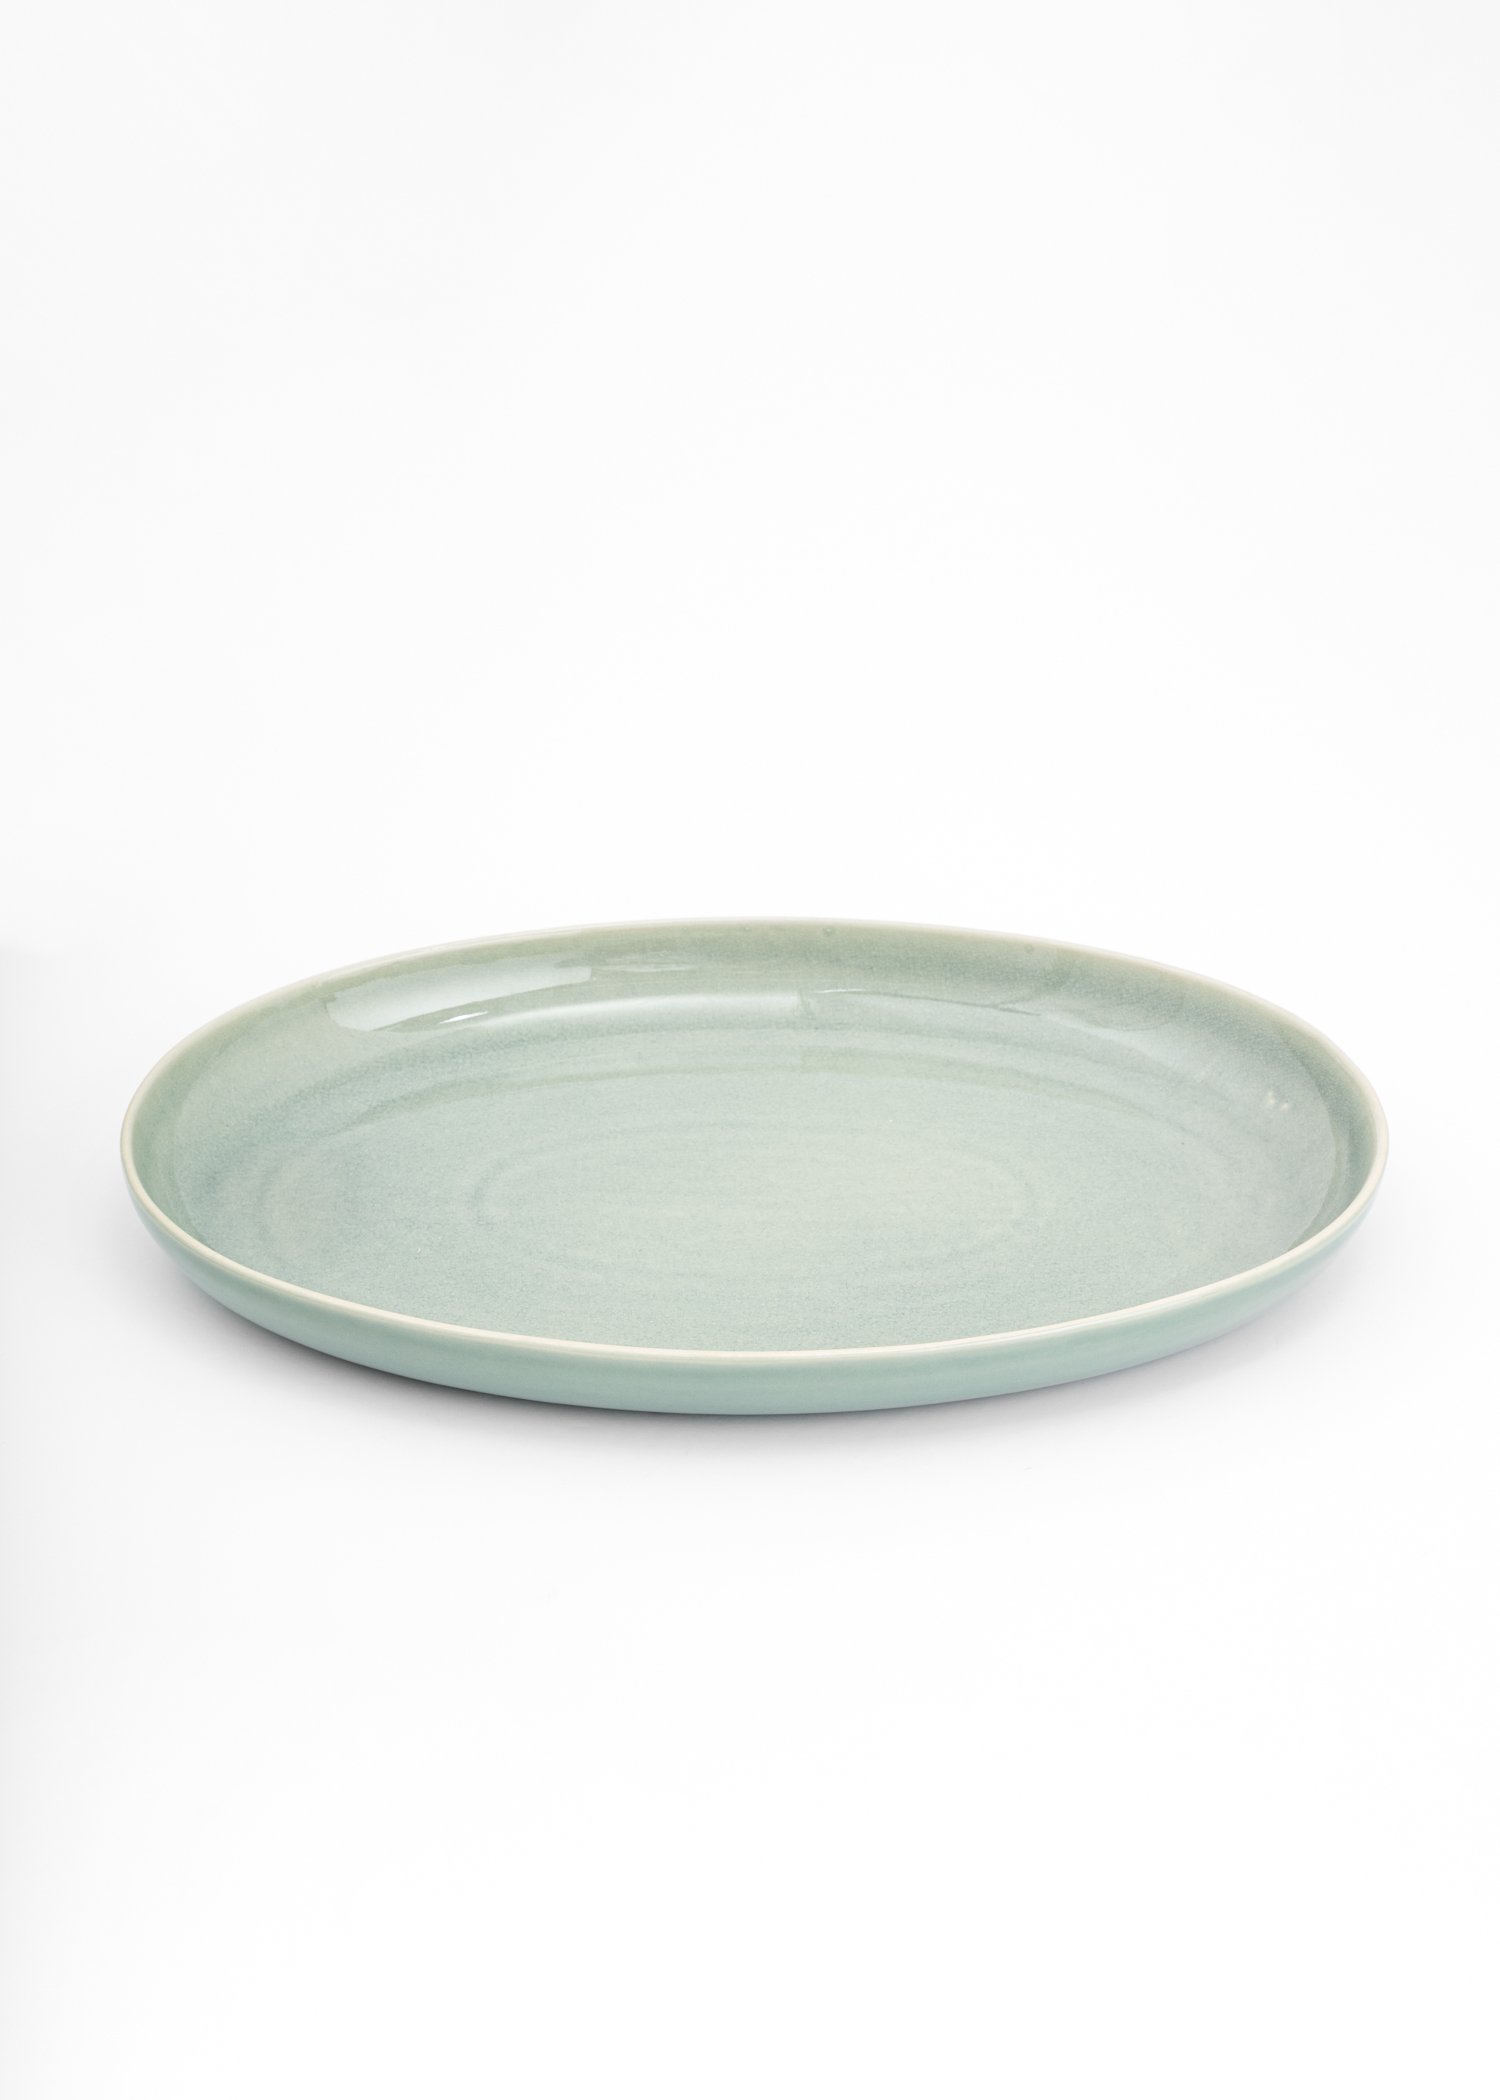 Stoneware serving plate